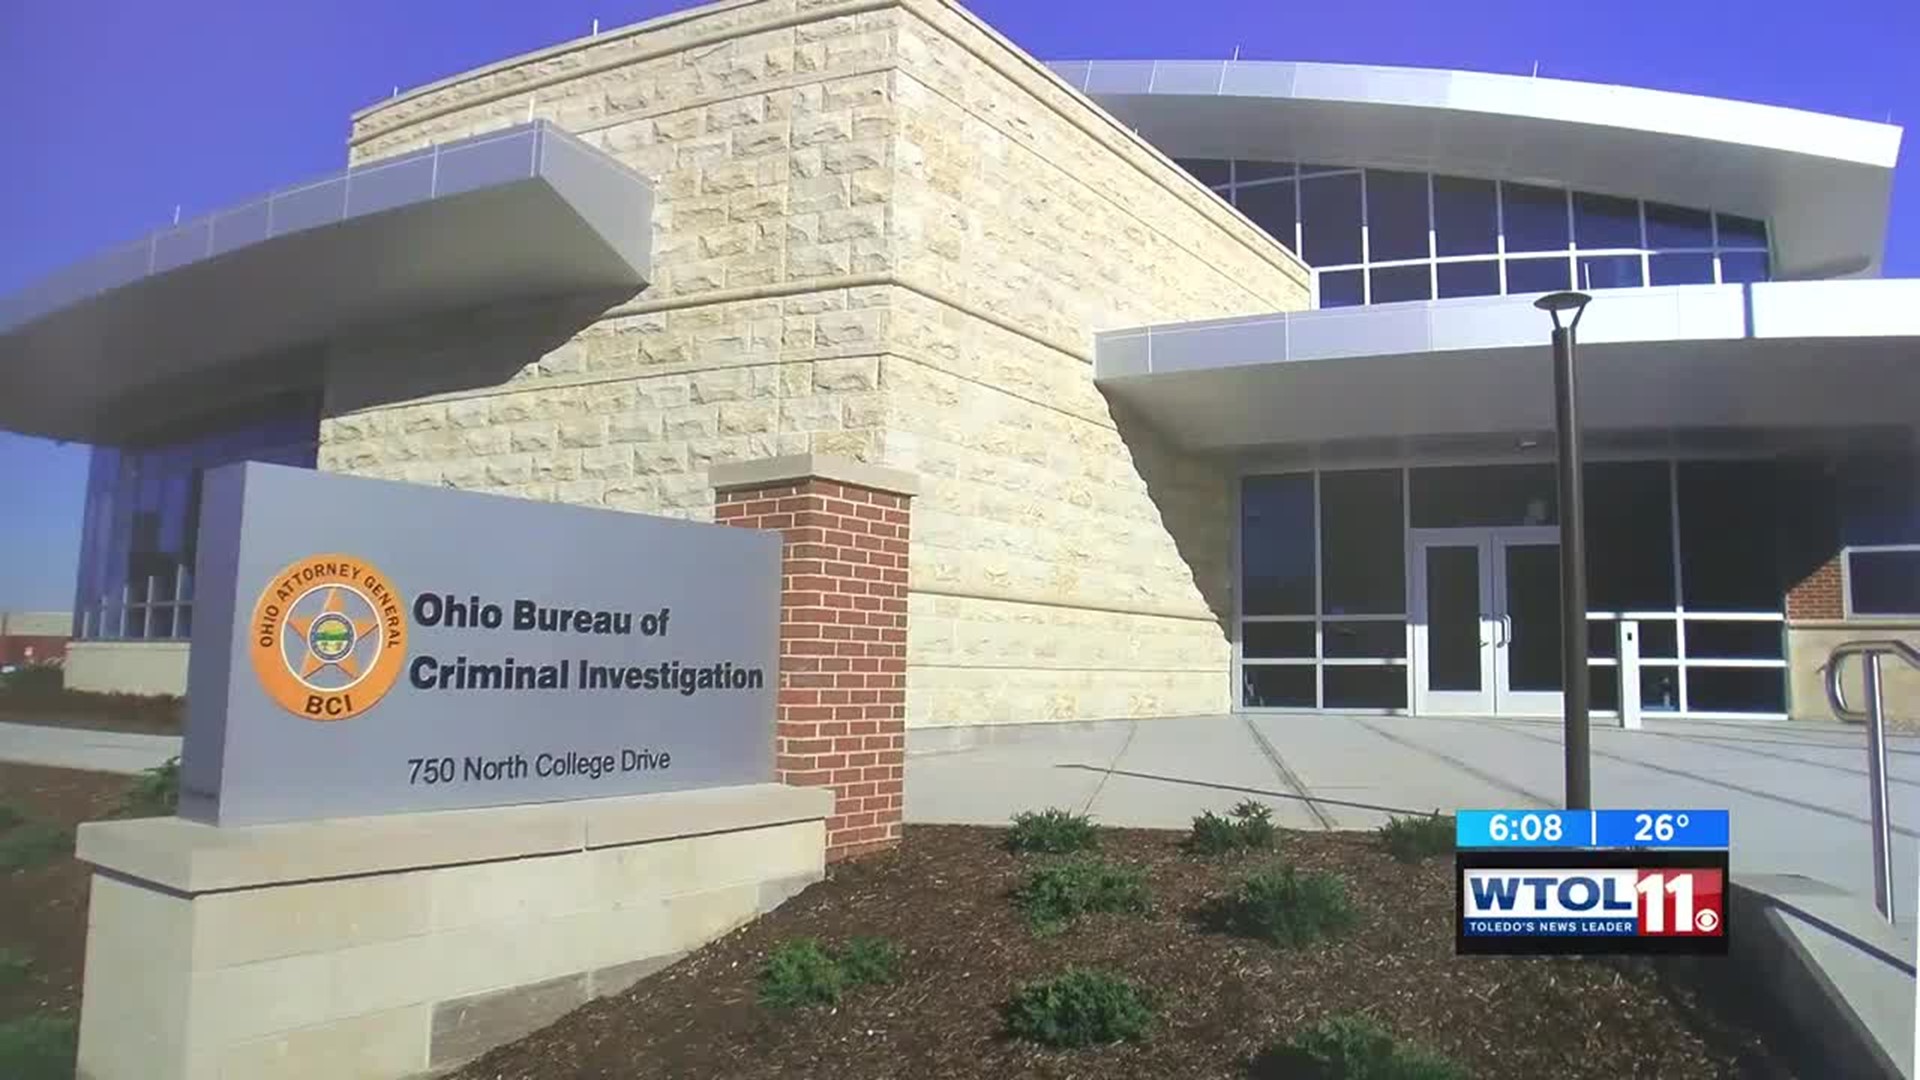 BGSU opens lab that makes Ohio a national leader in criminal investigations